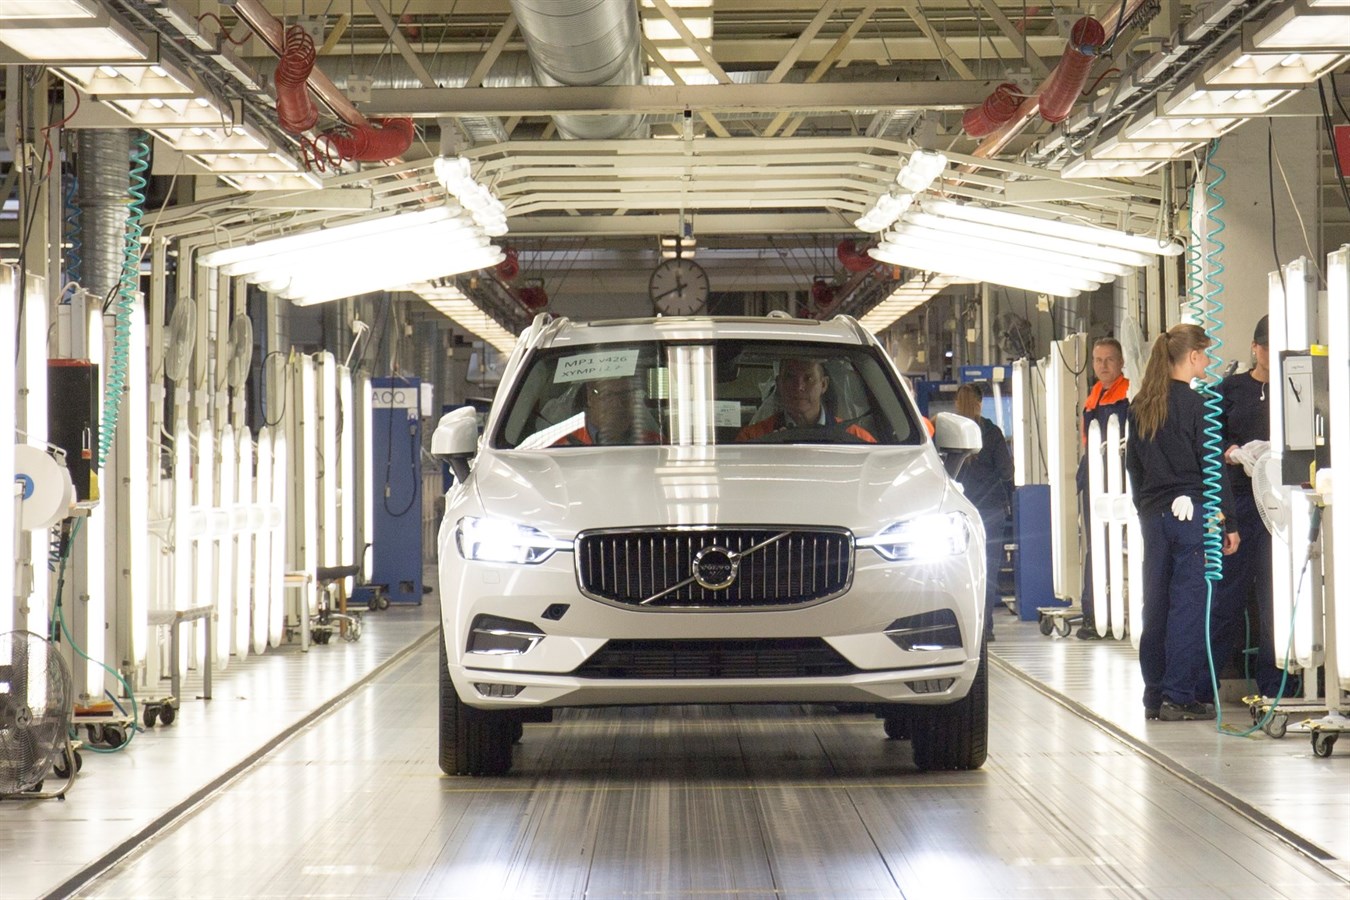 The first new XC60 rolls off the production line in Torslanda, Sweden